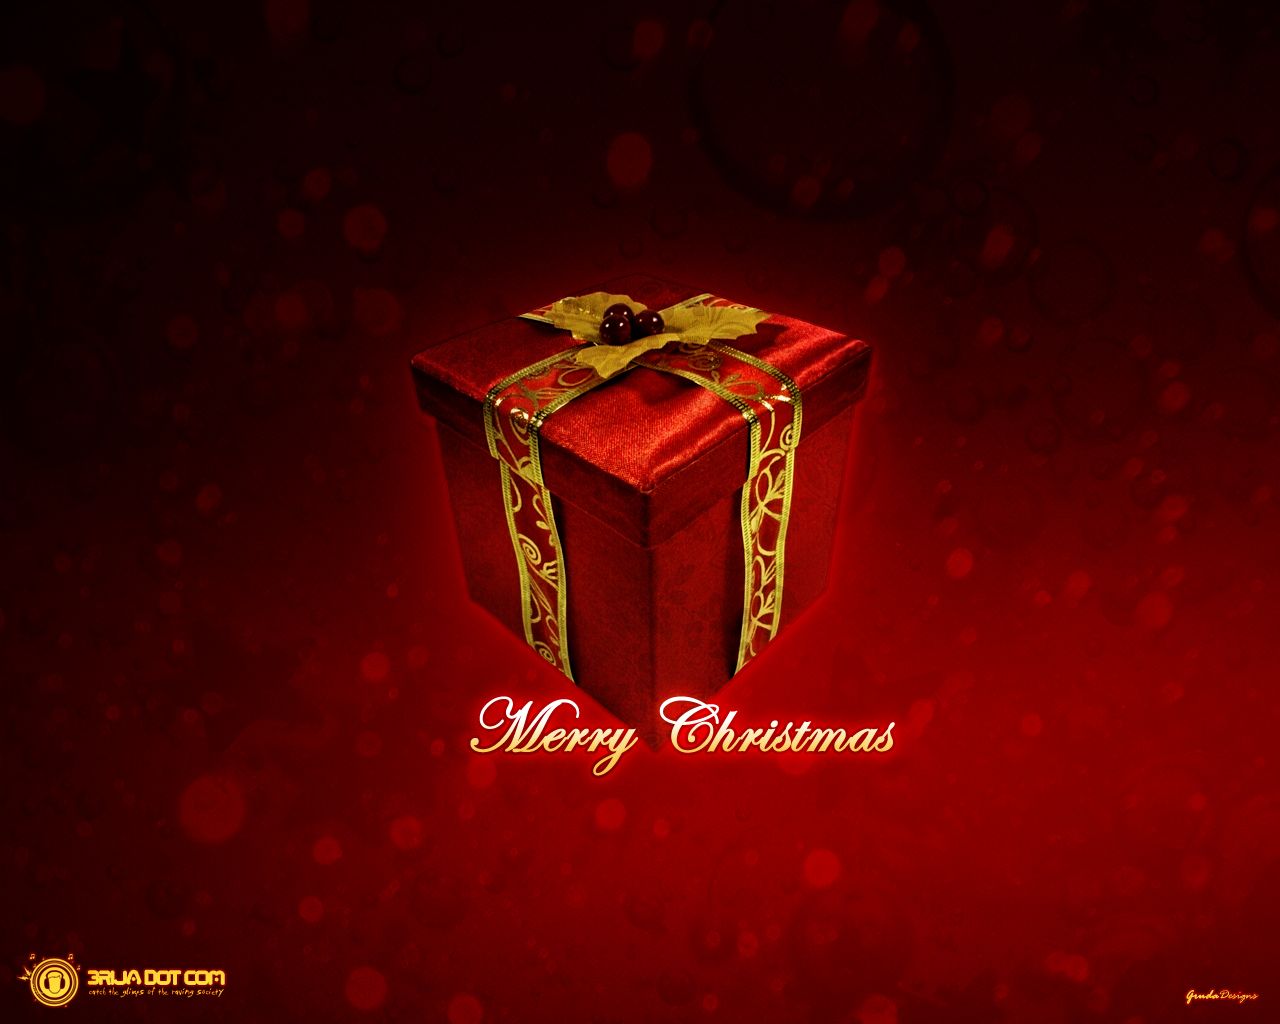 christmas, merry christmas, holiday, gift, red High Definition image